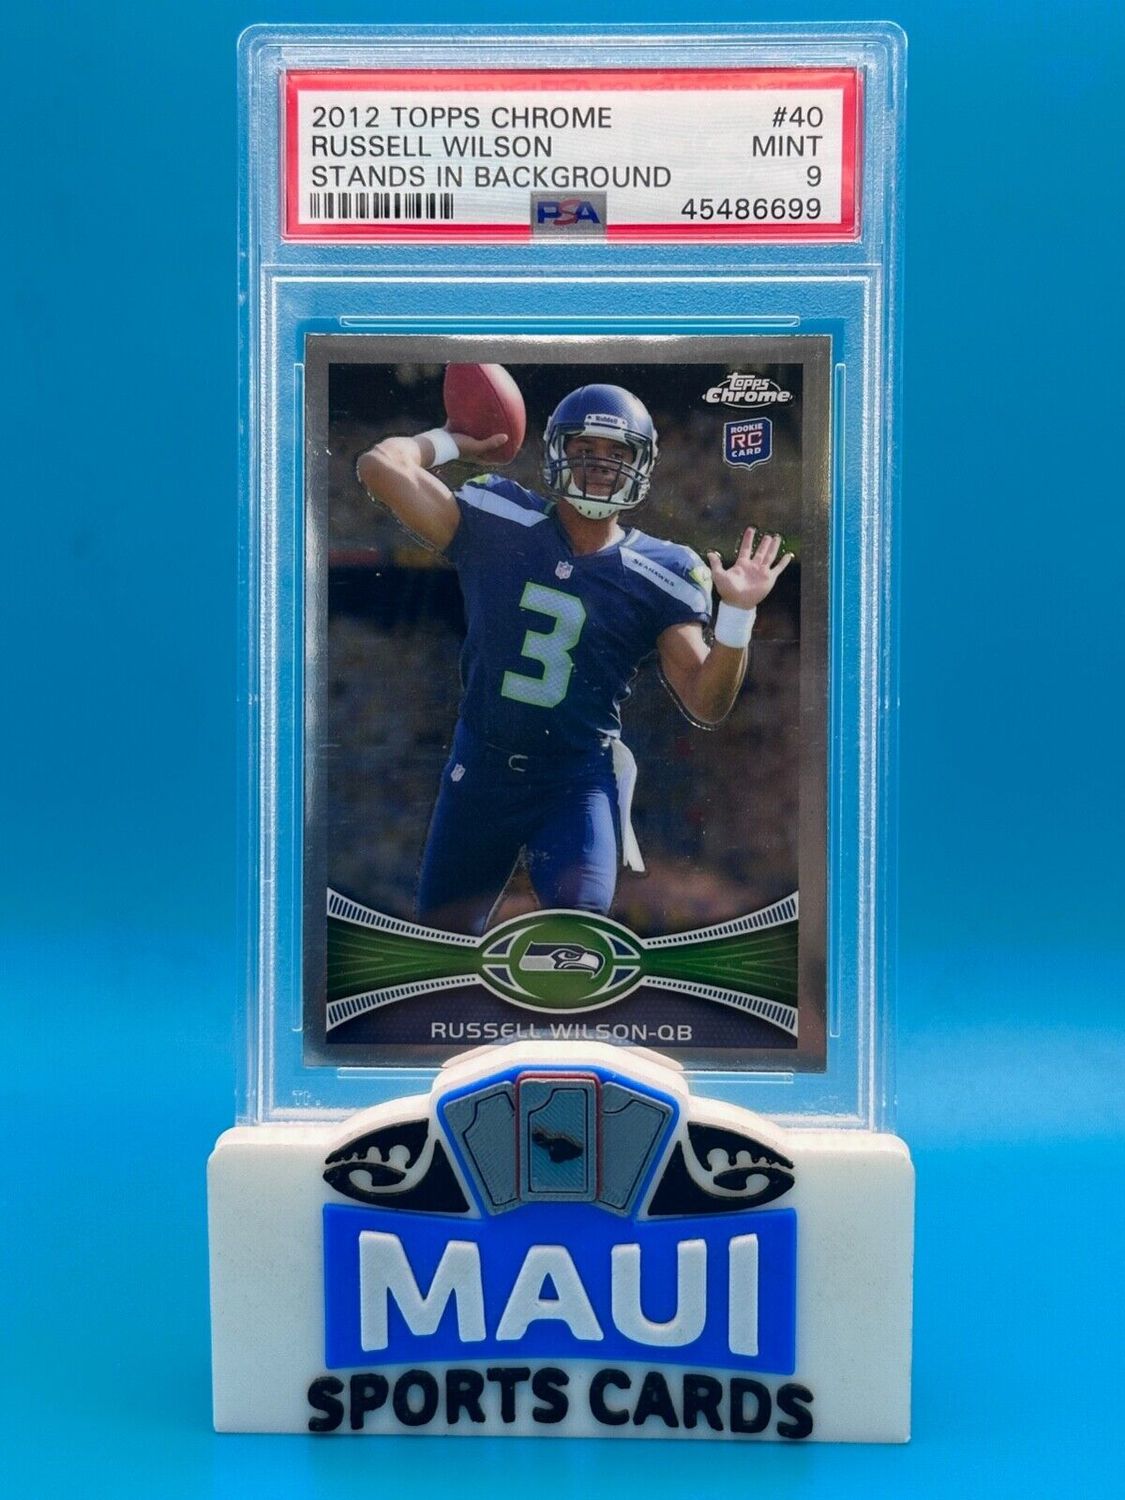 2012 TOPPS CHROME PSA 9 RUSSELL WILSON STANDS IN BACKGROUND RC #40